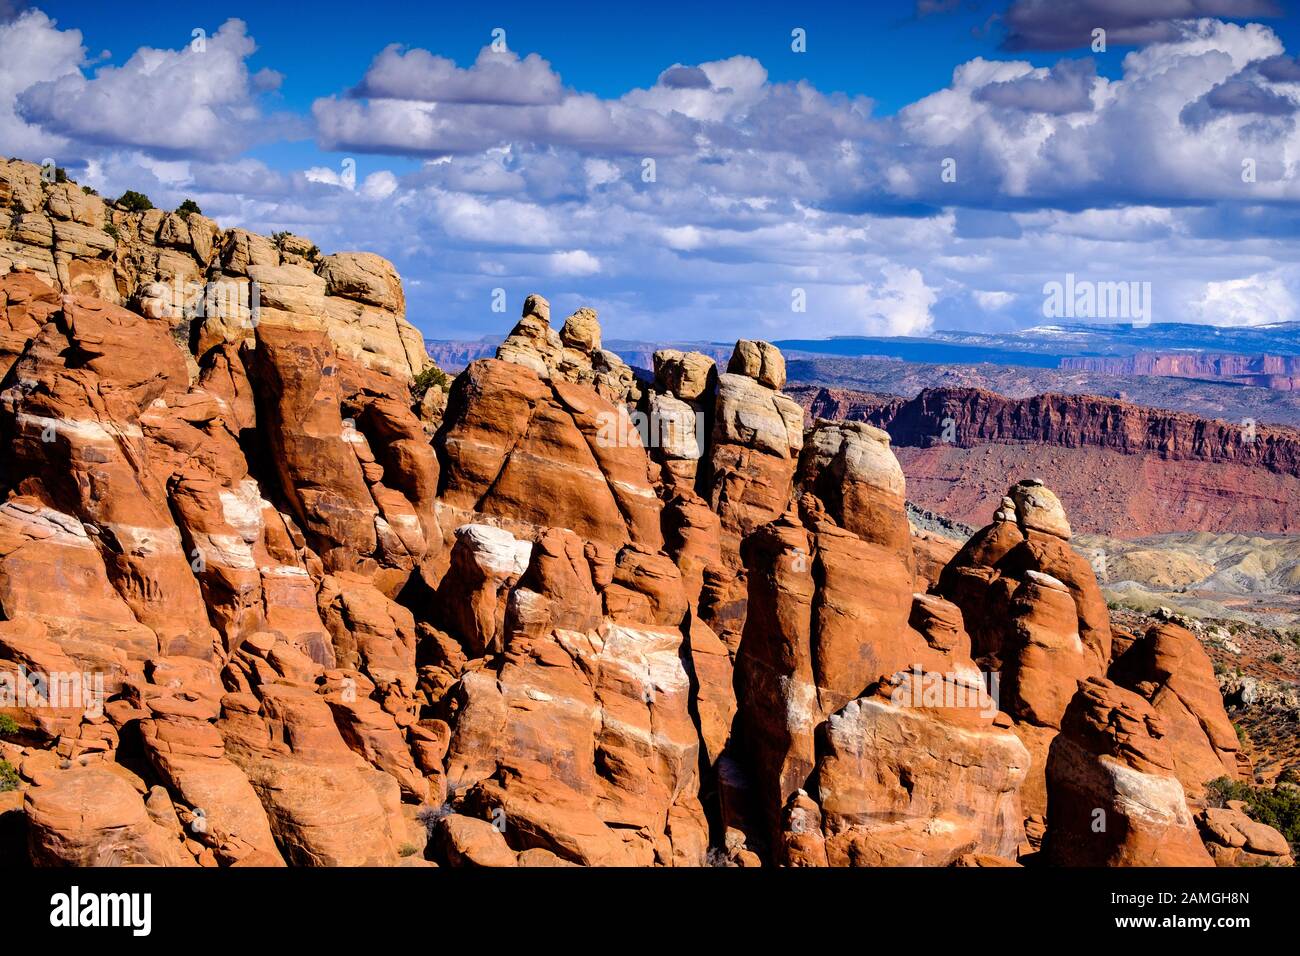 The Fiery Furnace, Arches National Park, Moab, Utah Stock Photo